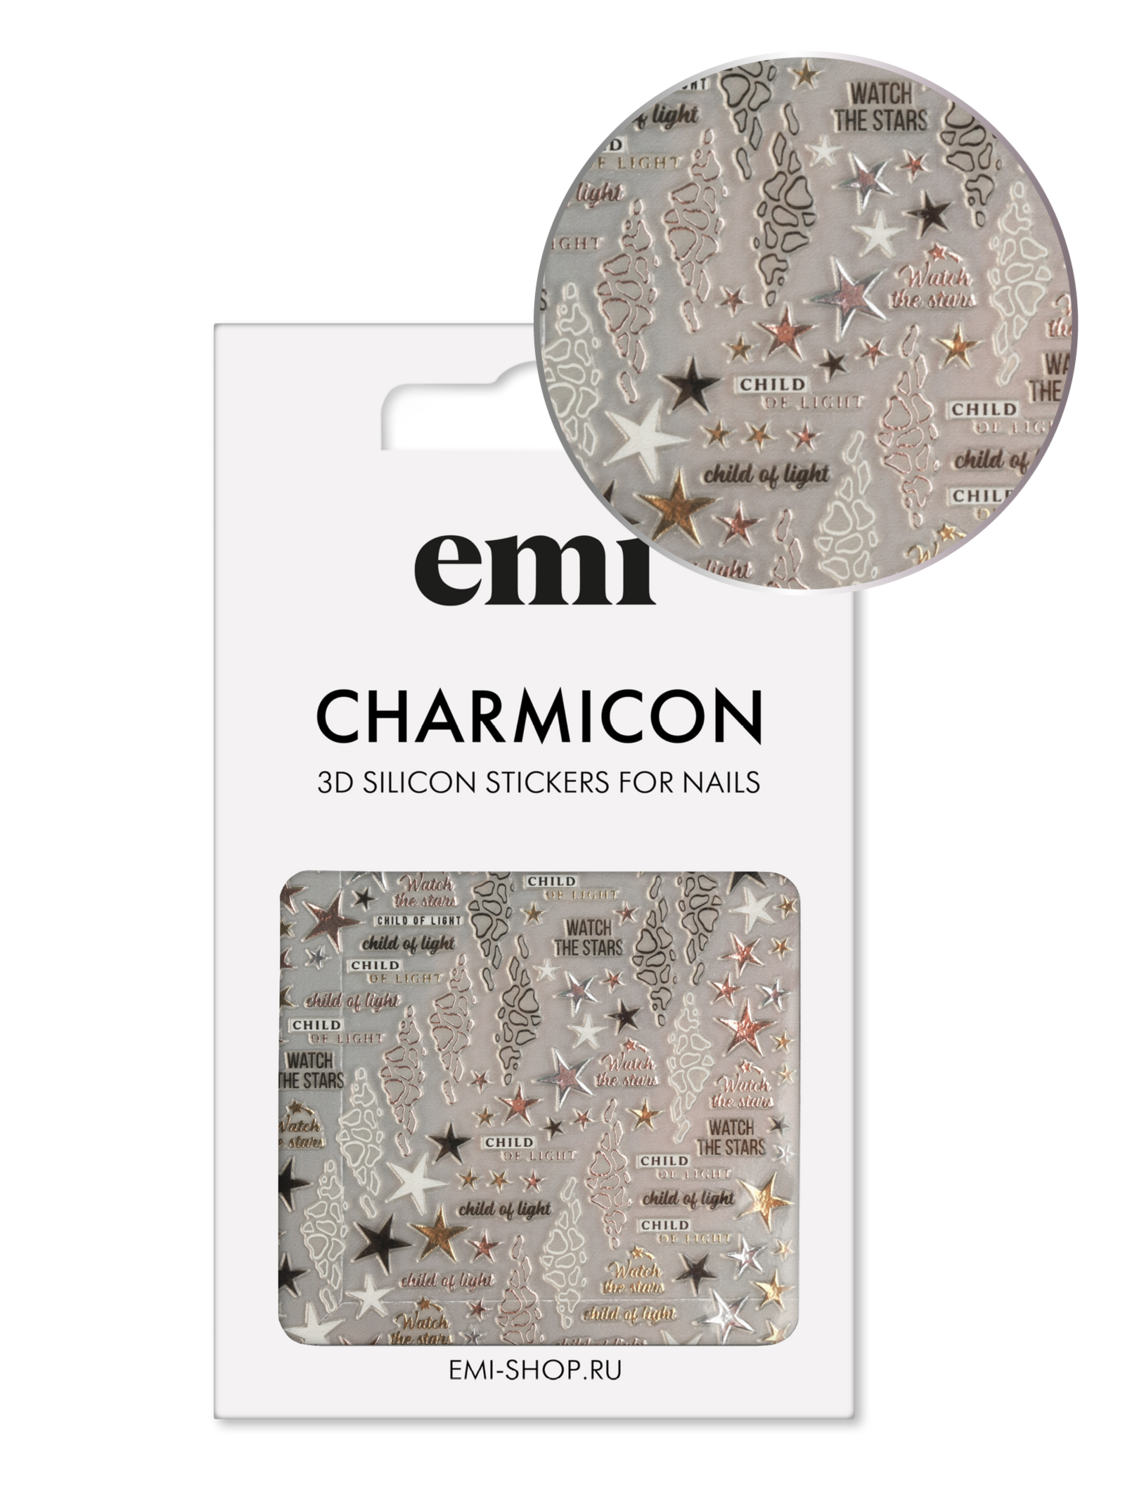 Charmicon 3D Silicone Stickers #218 Starfall